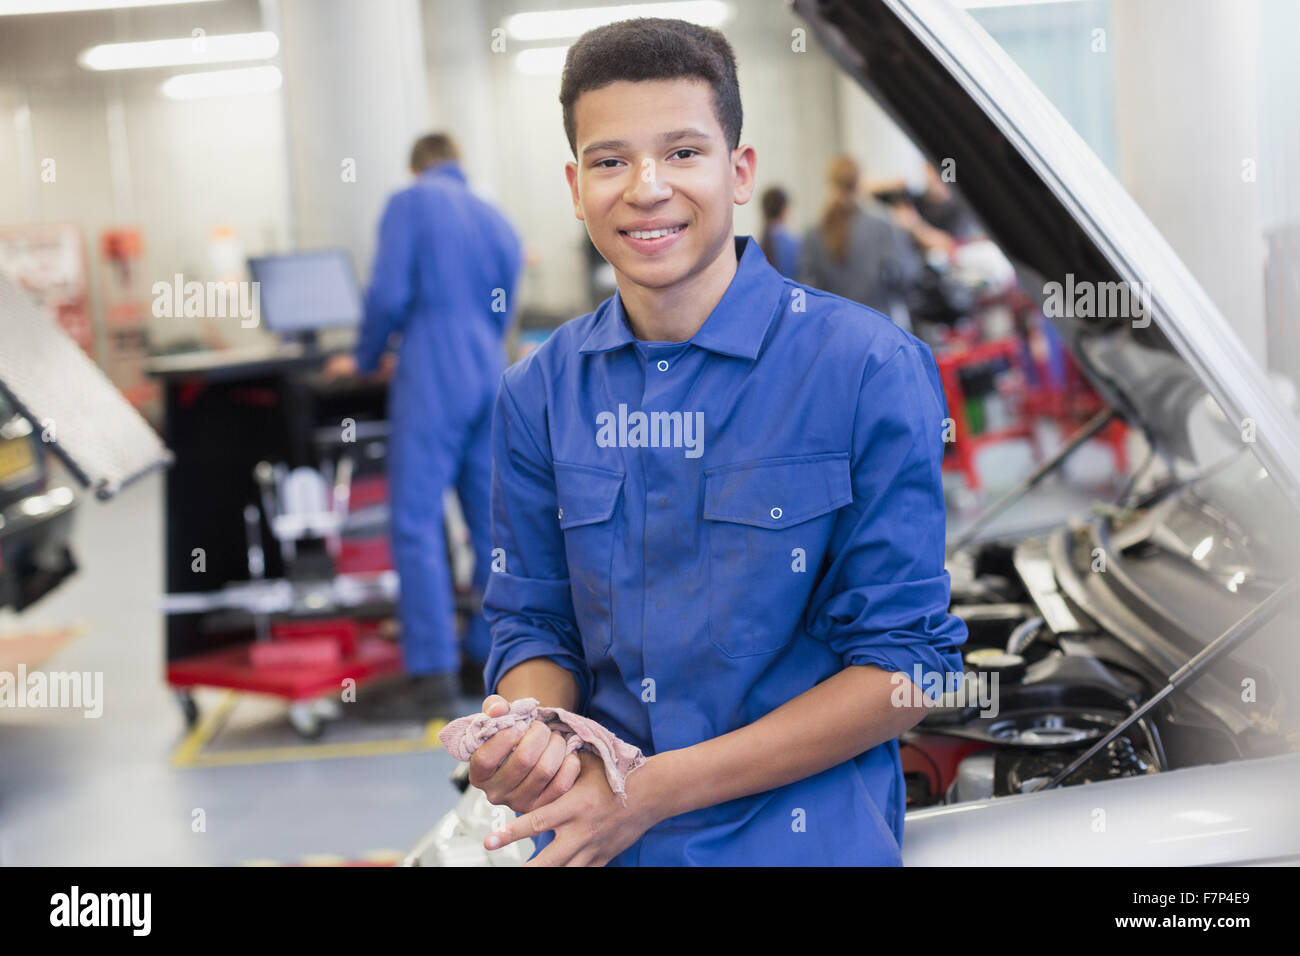 Portrait smiling mechanic leaning on car in auto repair shop Stock Photo